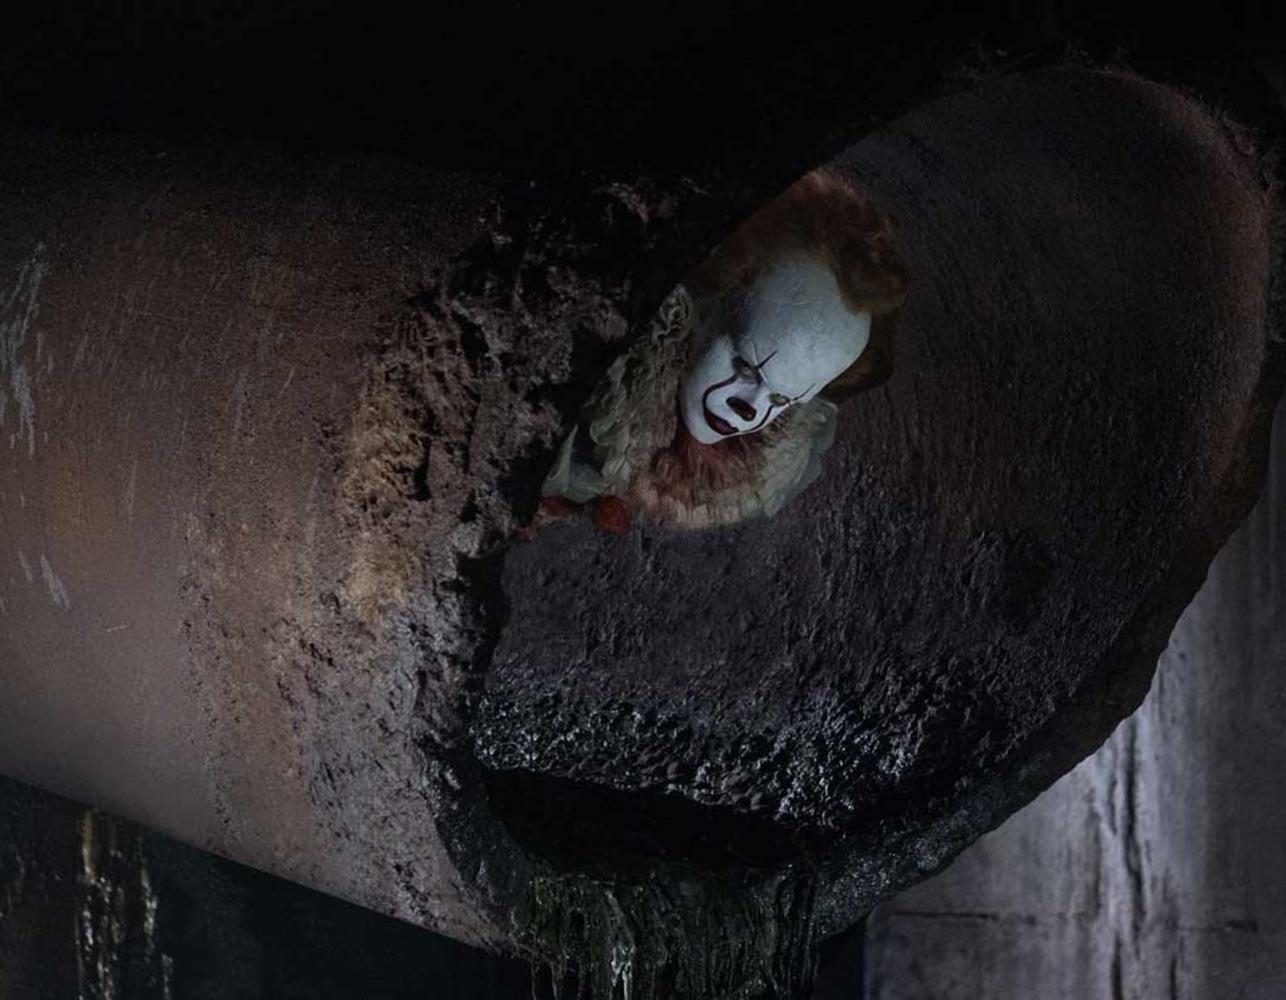 Bill Skarsgard stars as Pennywise the Dancing Clown in It, based on the Stephen King novel of the same name. It has received positive reviews and currently holds an 85 percent approval rating on Rotten Tomatoes.